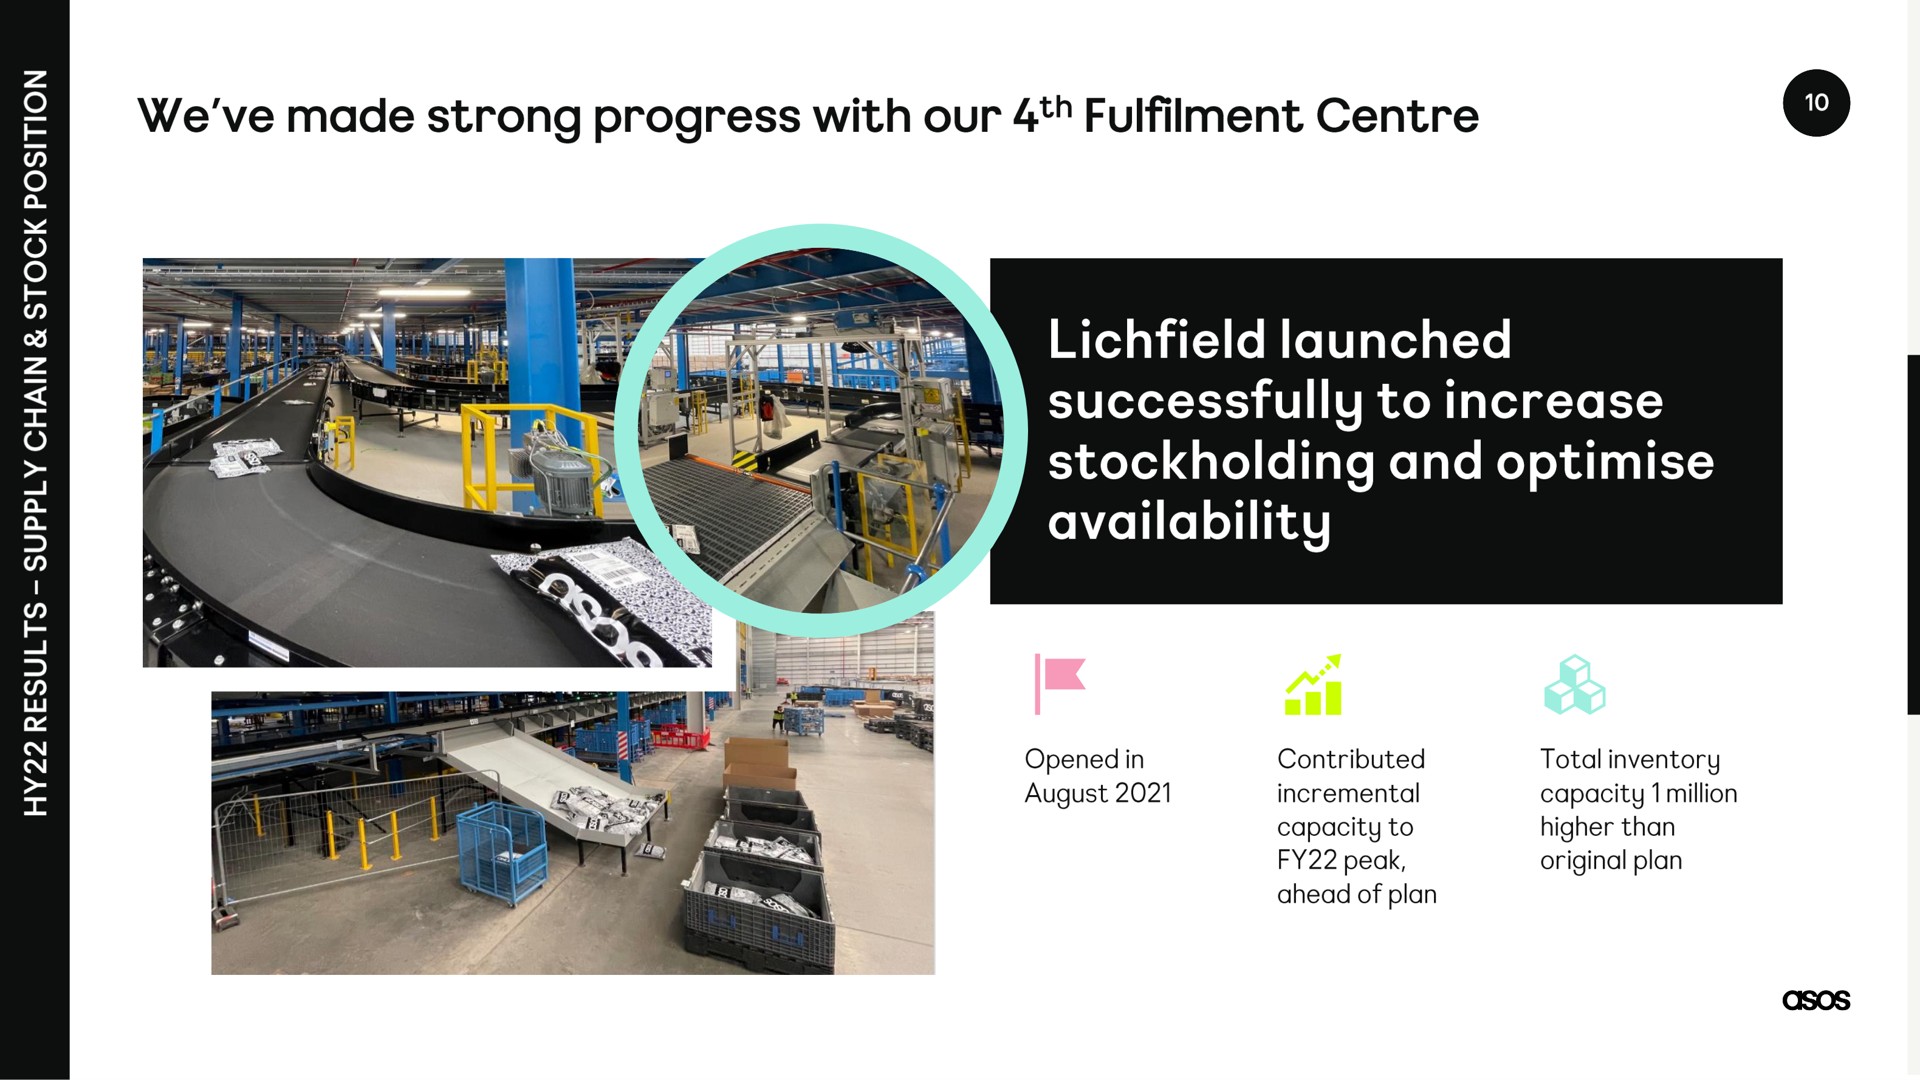 we made strong progress with our launched successfully to increase stockholding and availability | Asos